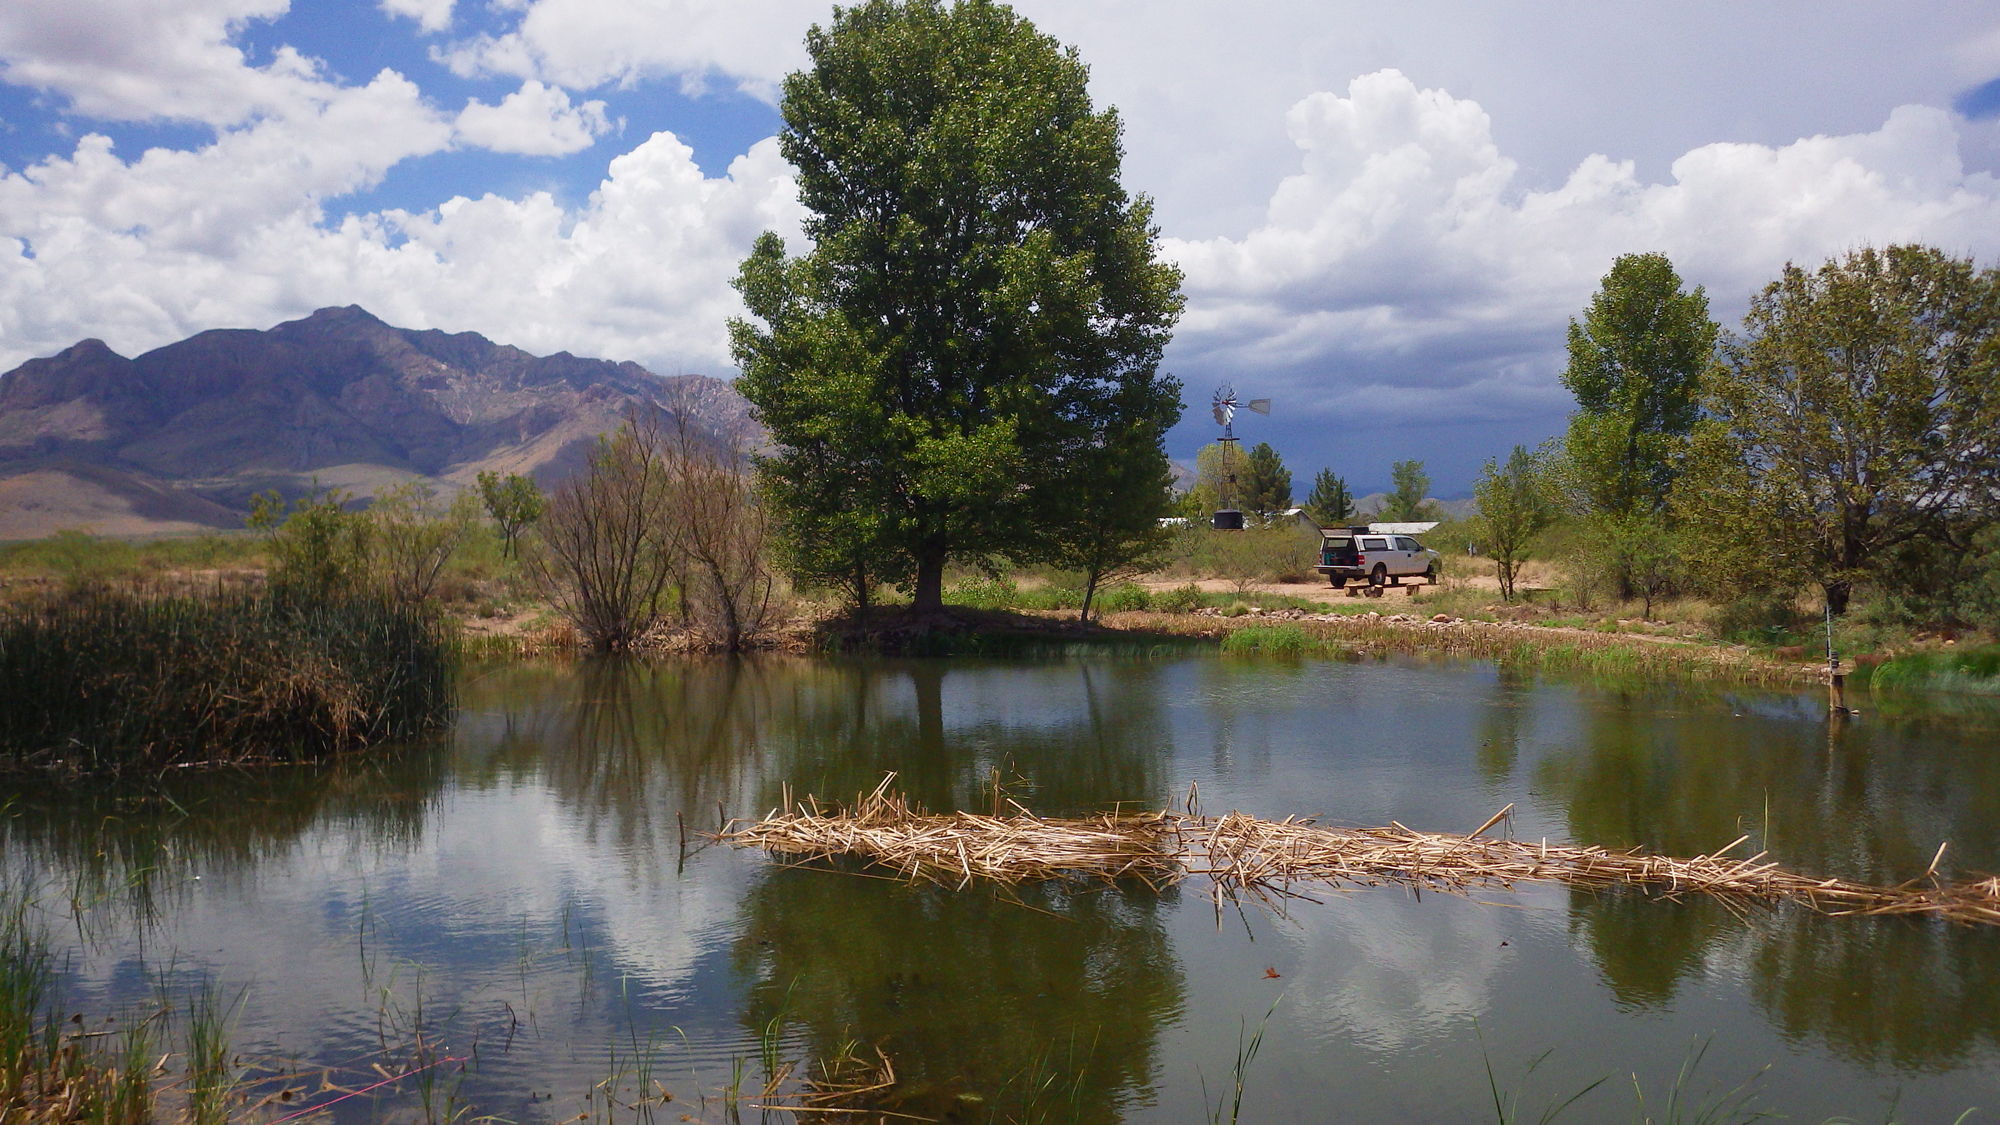 A Safe Harbor Agreement (SHA) topminnow-pupfish pond in SE Arizona. Photo courtesy of Ross Timmons, Arizona Game and Fish Department